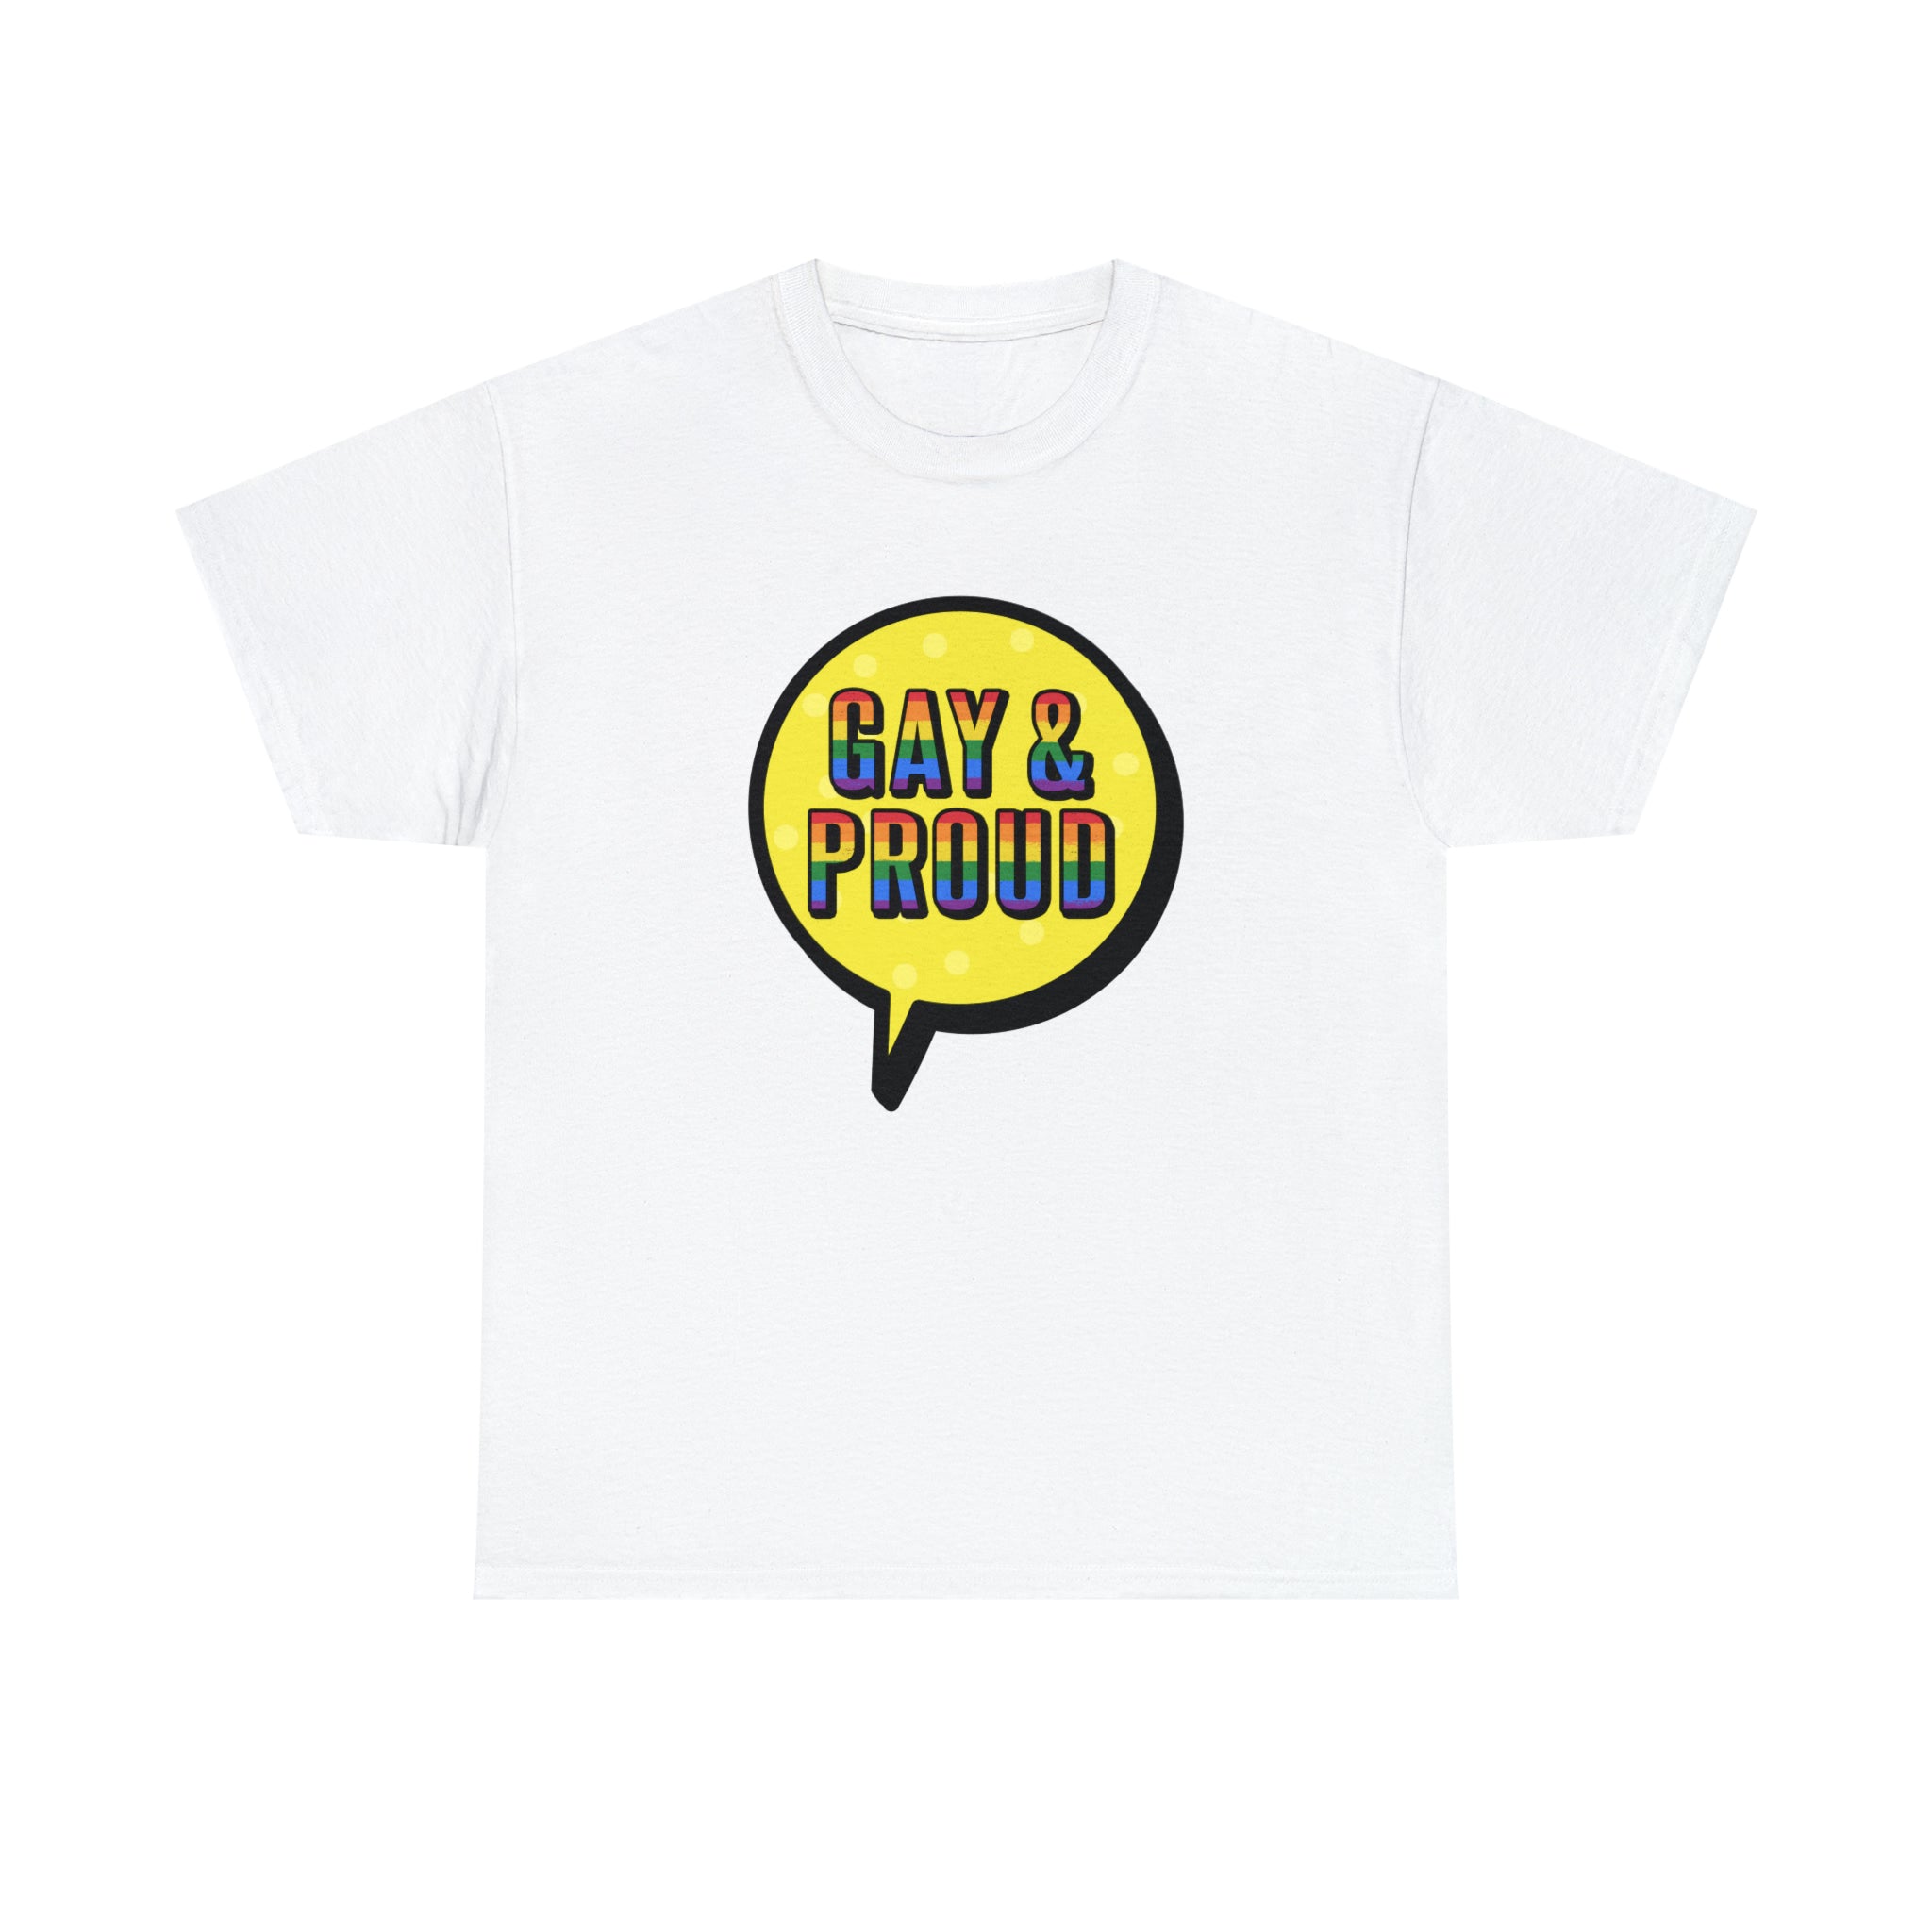 A comfortable Gay & Proud T-shirt adorned with a yellow and blue circle featuring text.